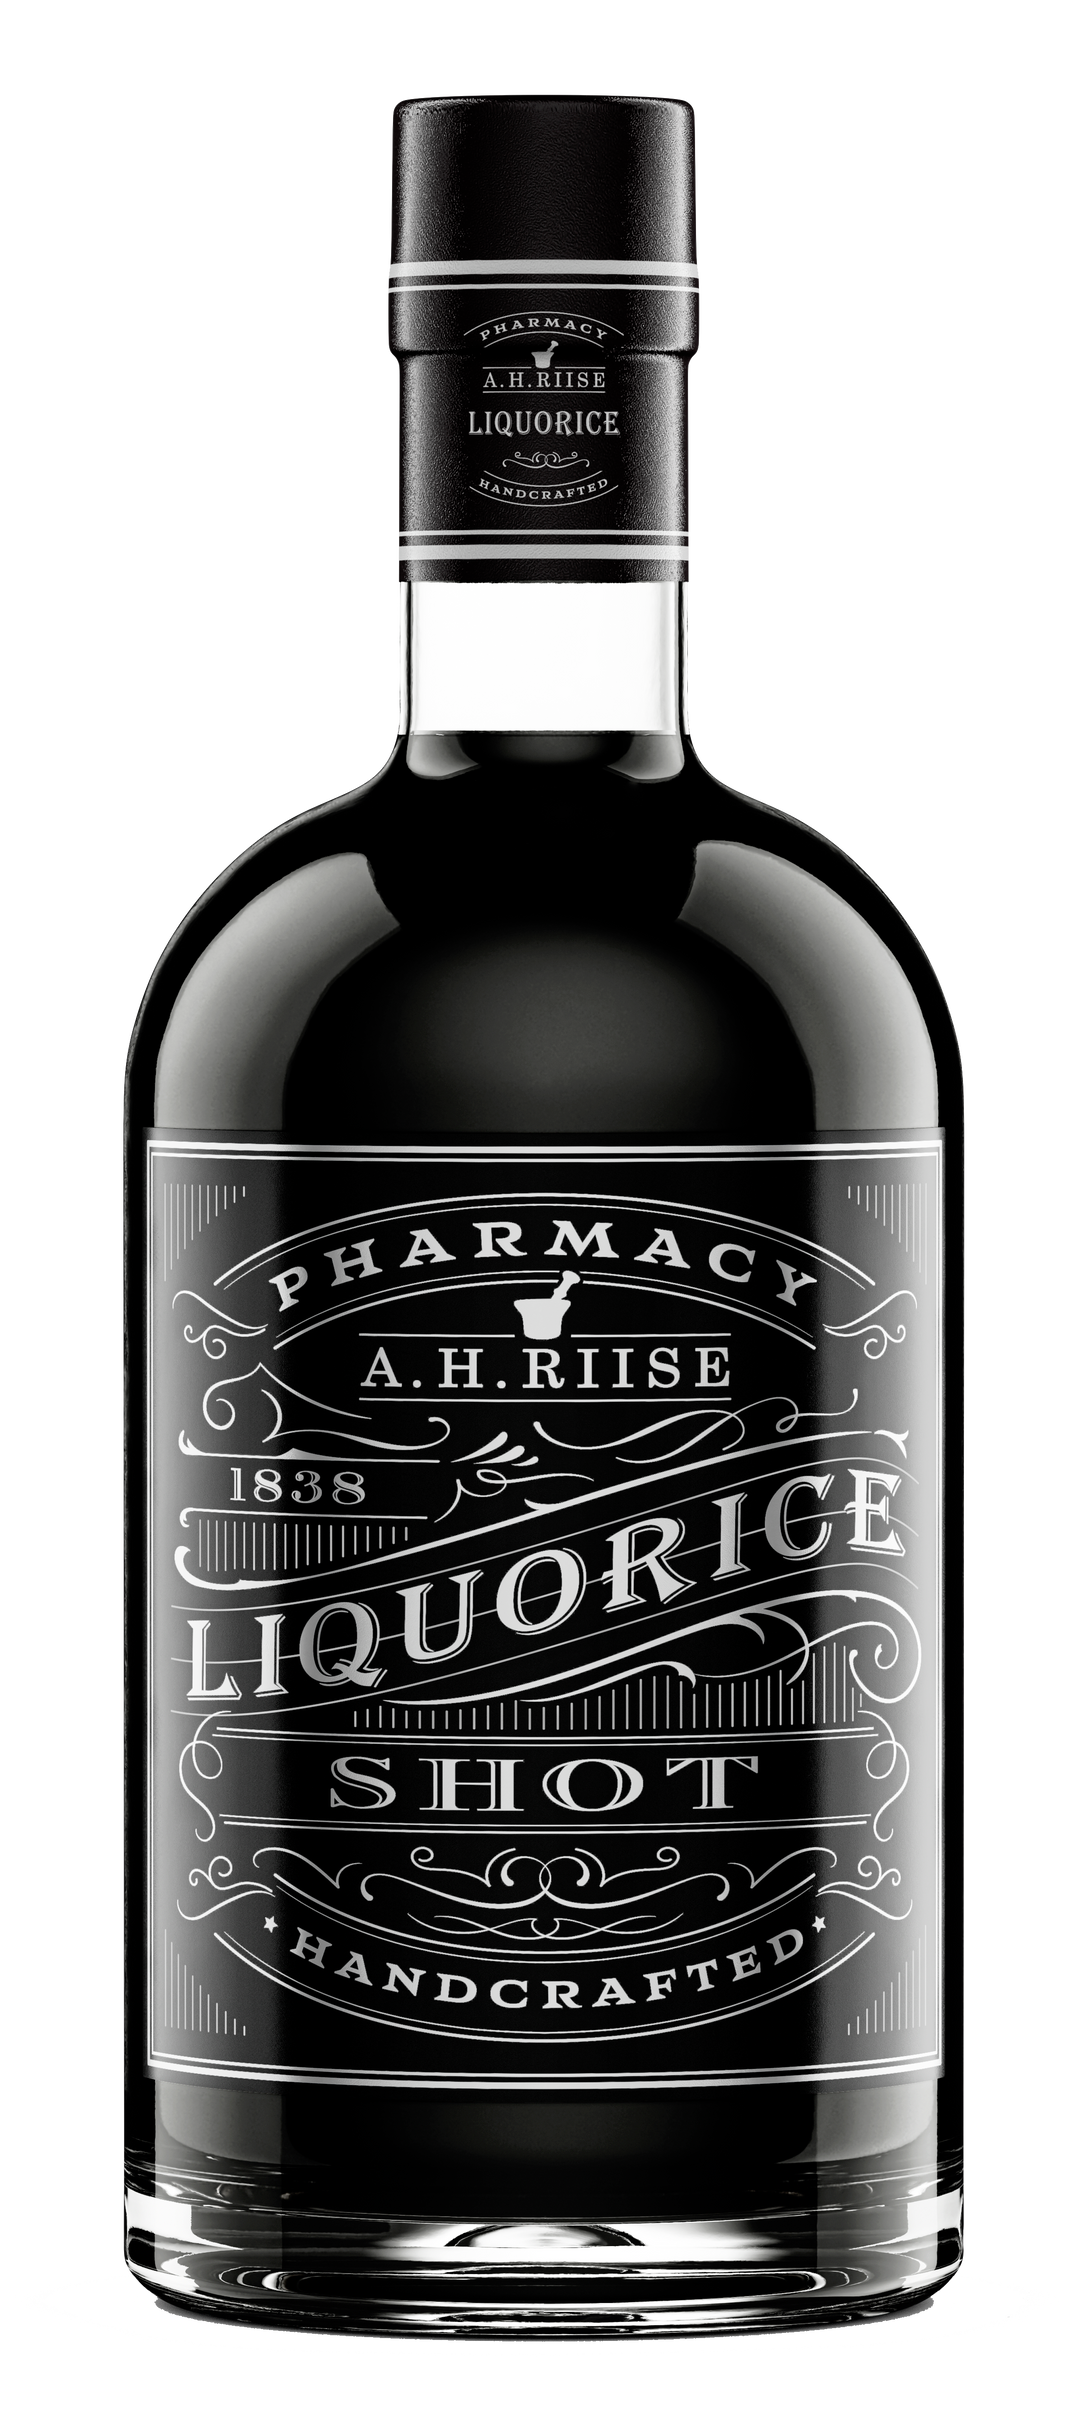 A. H. Riise Pharmacy Riise Licorice Shot